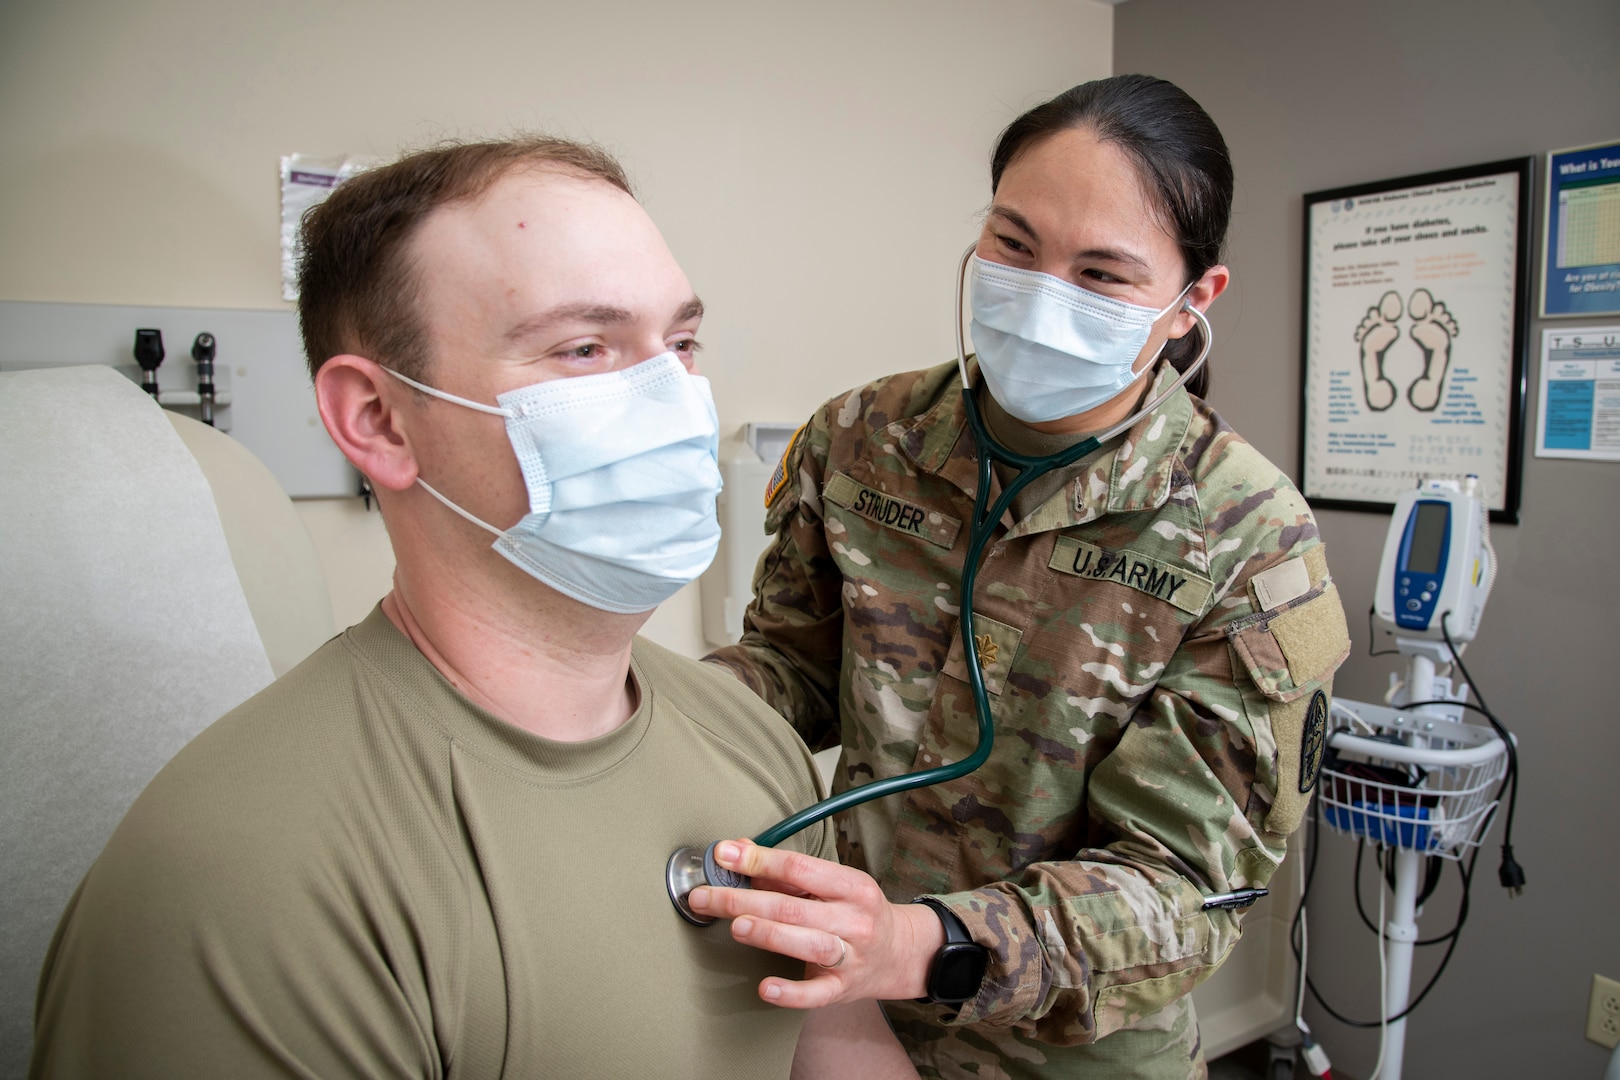 A military doctor checks a patient's heartbeat with a stethoscope.